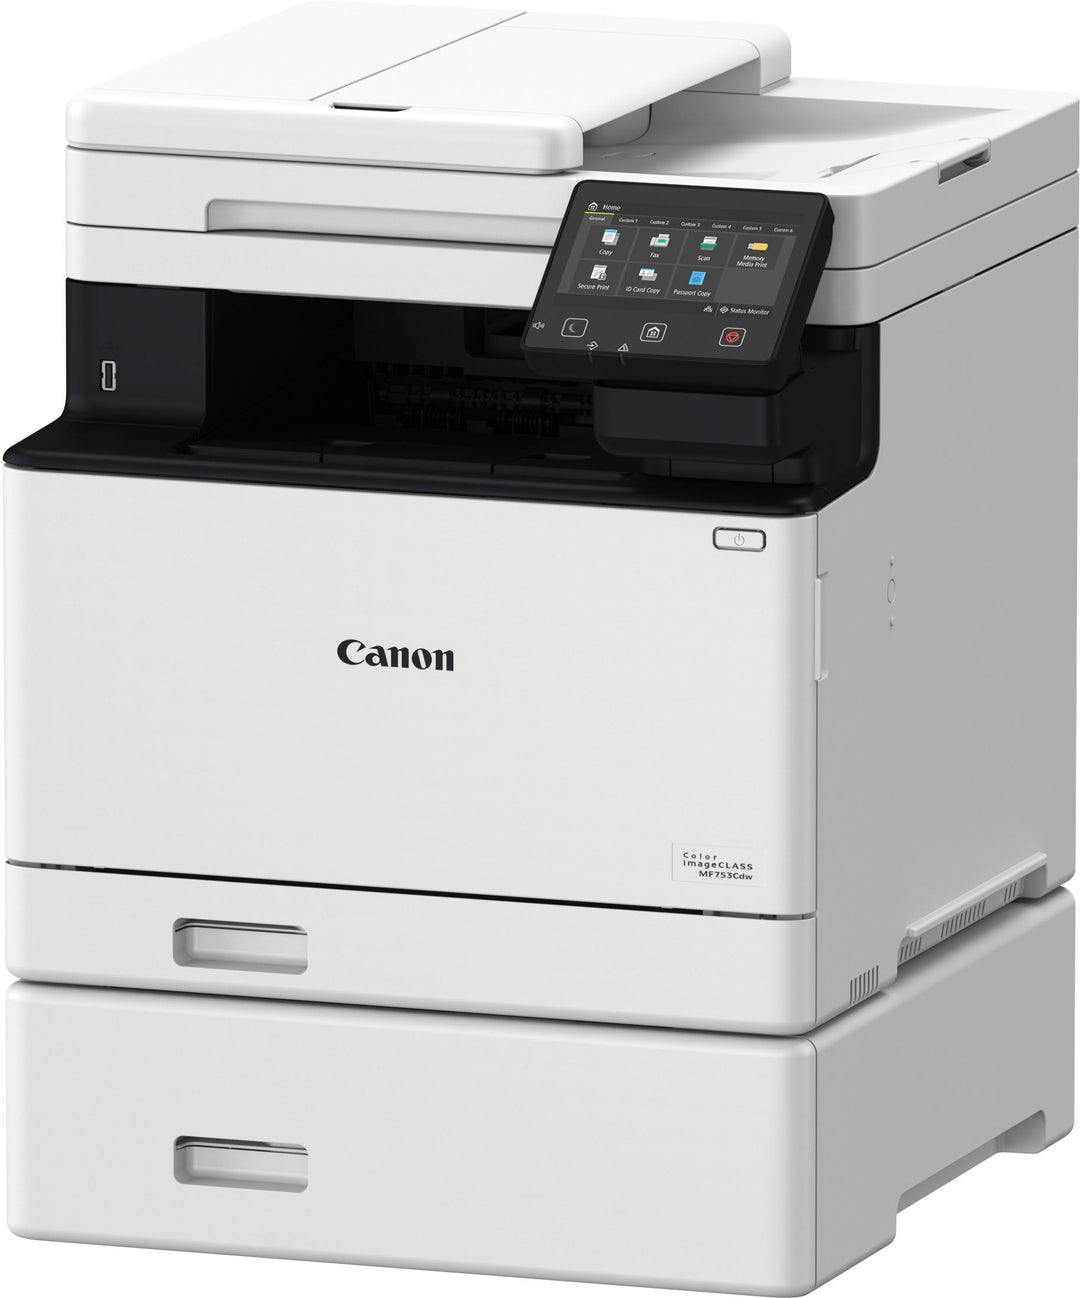 Canon - imageCLASS MF753Cdw Wireless Color All-In-One Laser Printer with Fax - White_5